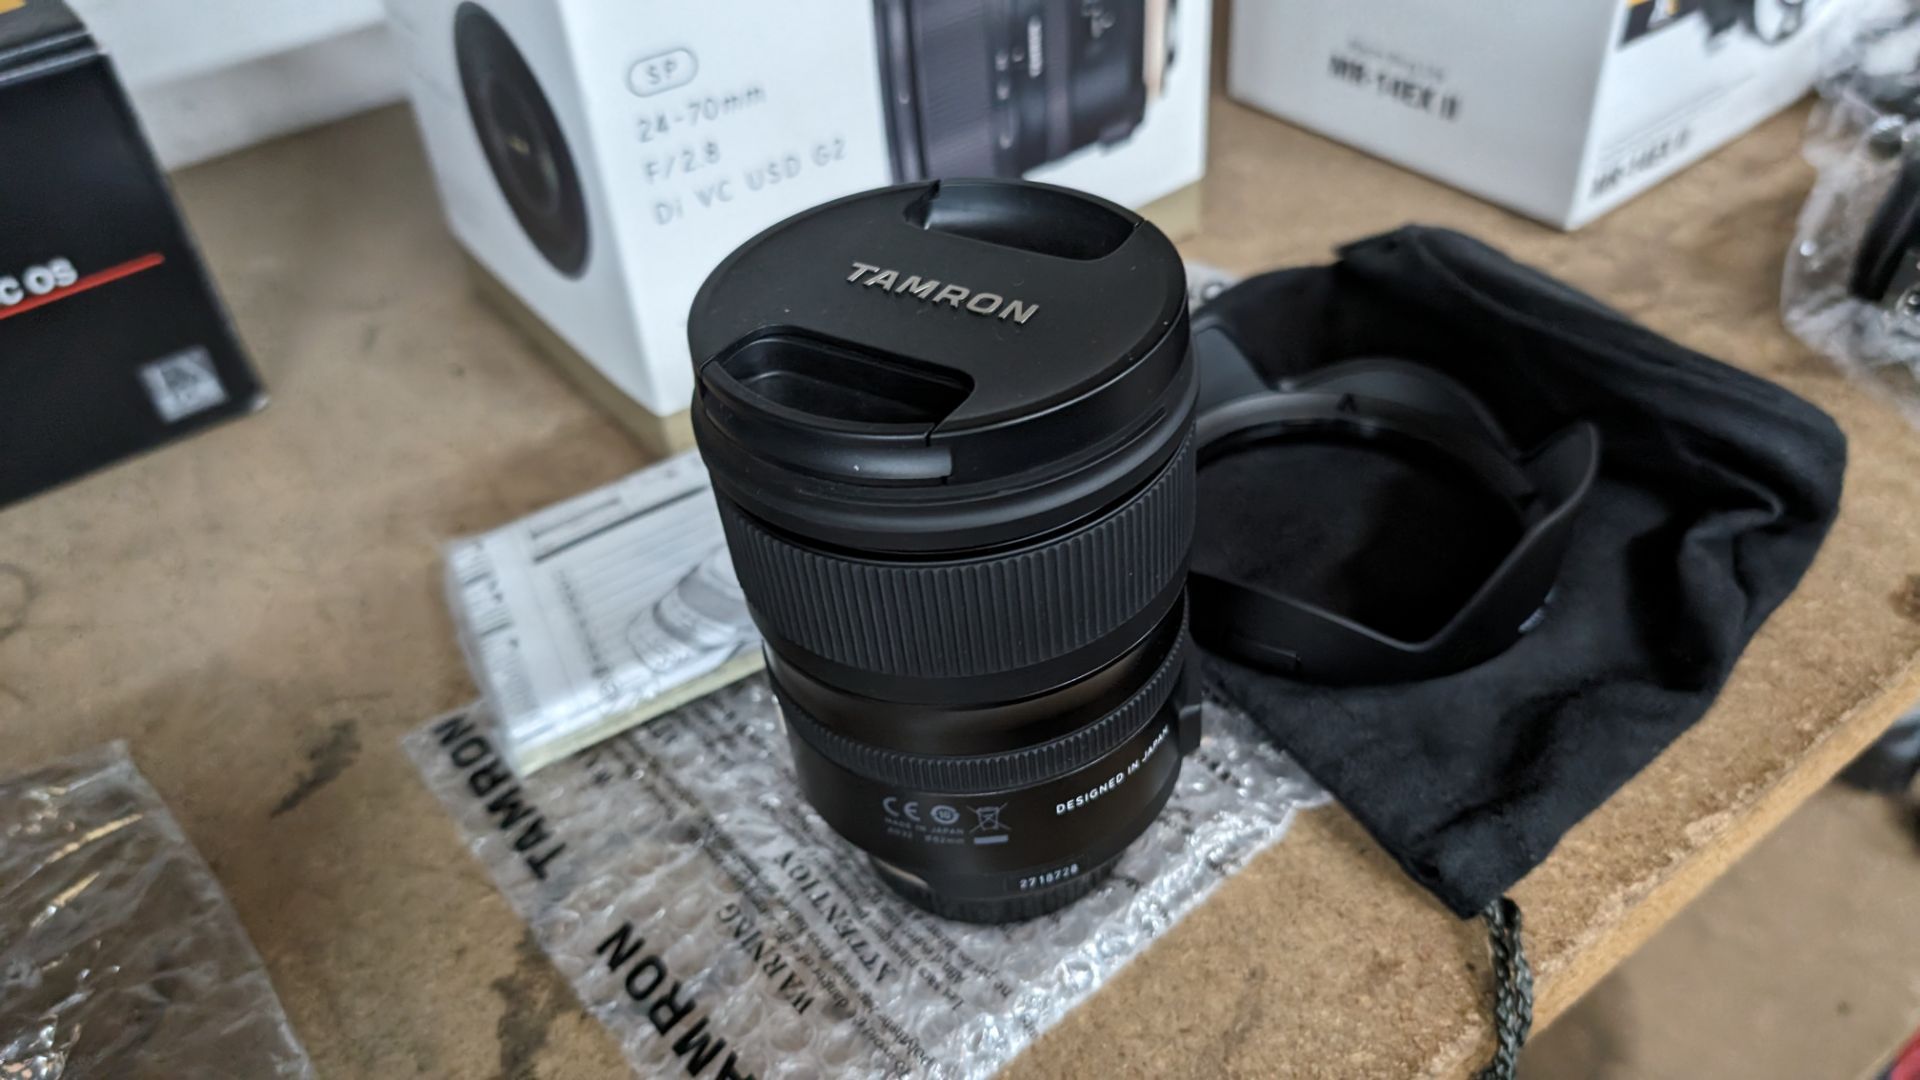 Tamron SP 24-70mm f/2.8 Di VC USD G2 lens, including soft carry case and attachment - Image 9 of 10